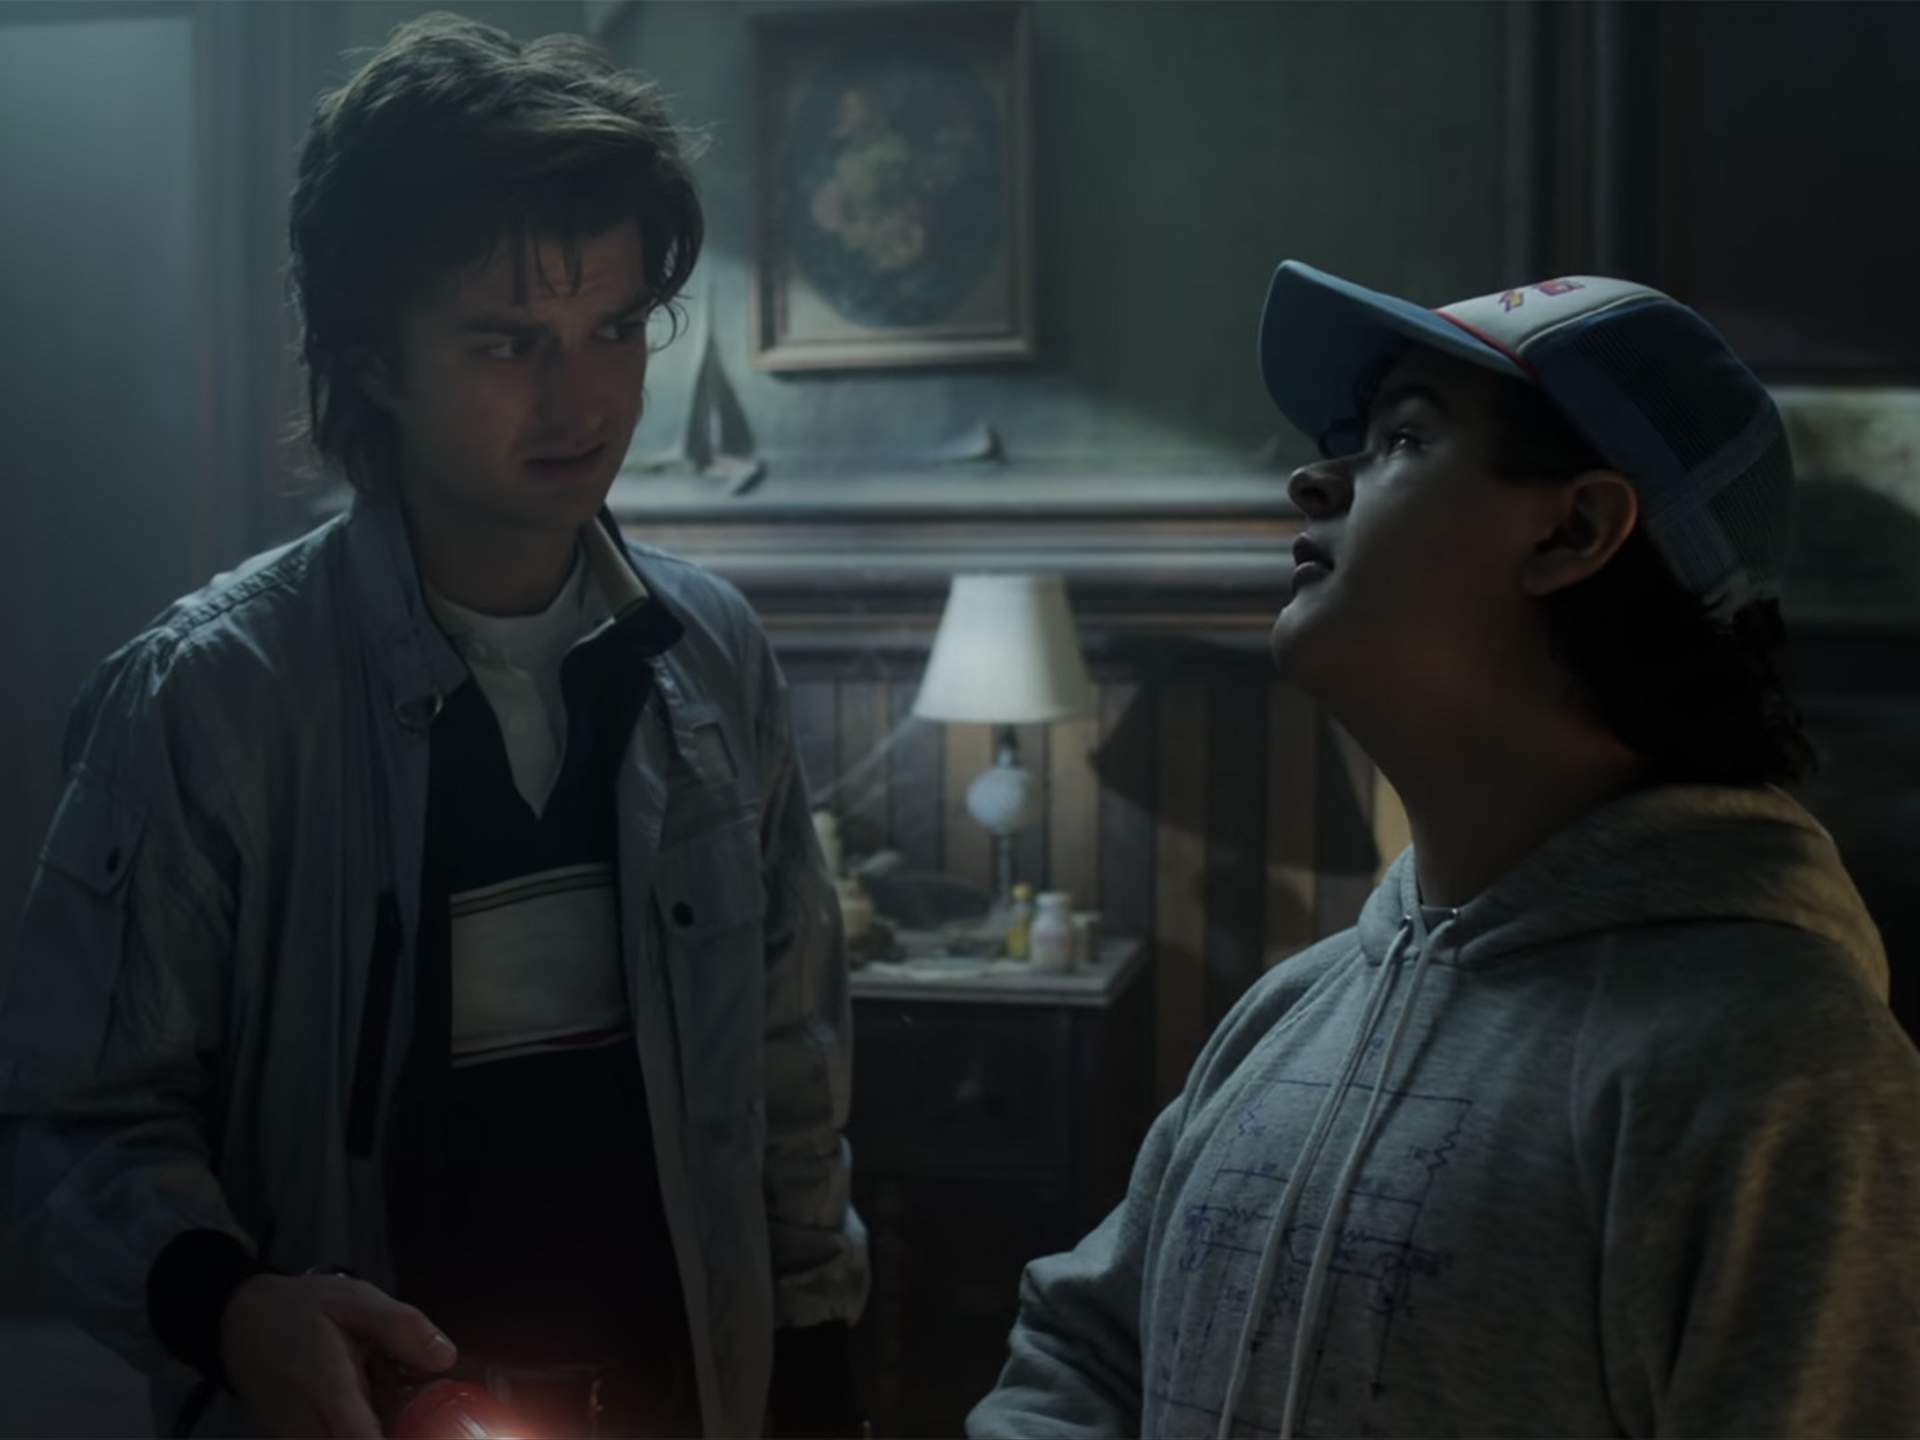 Watch an exclusive clip from Spree featuring Stranger Things' Joe Keery